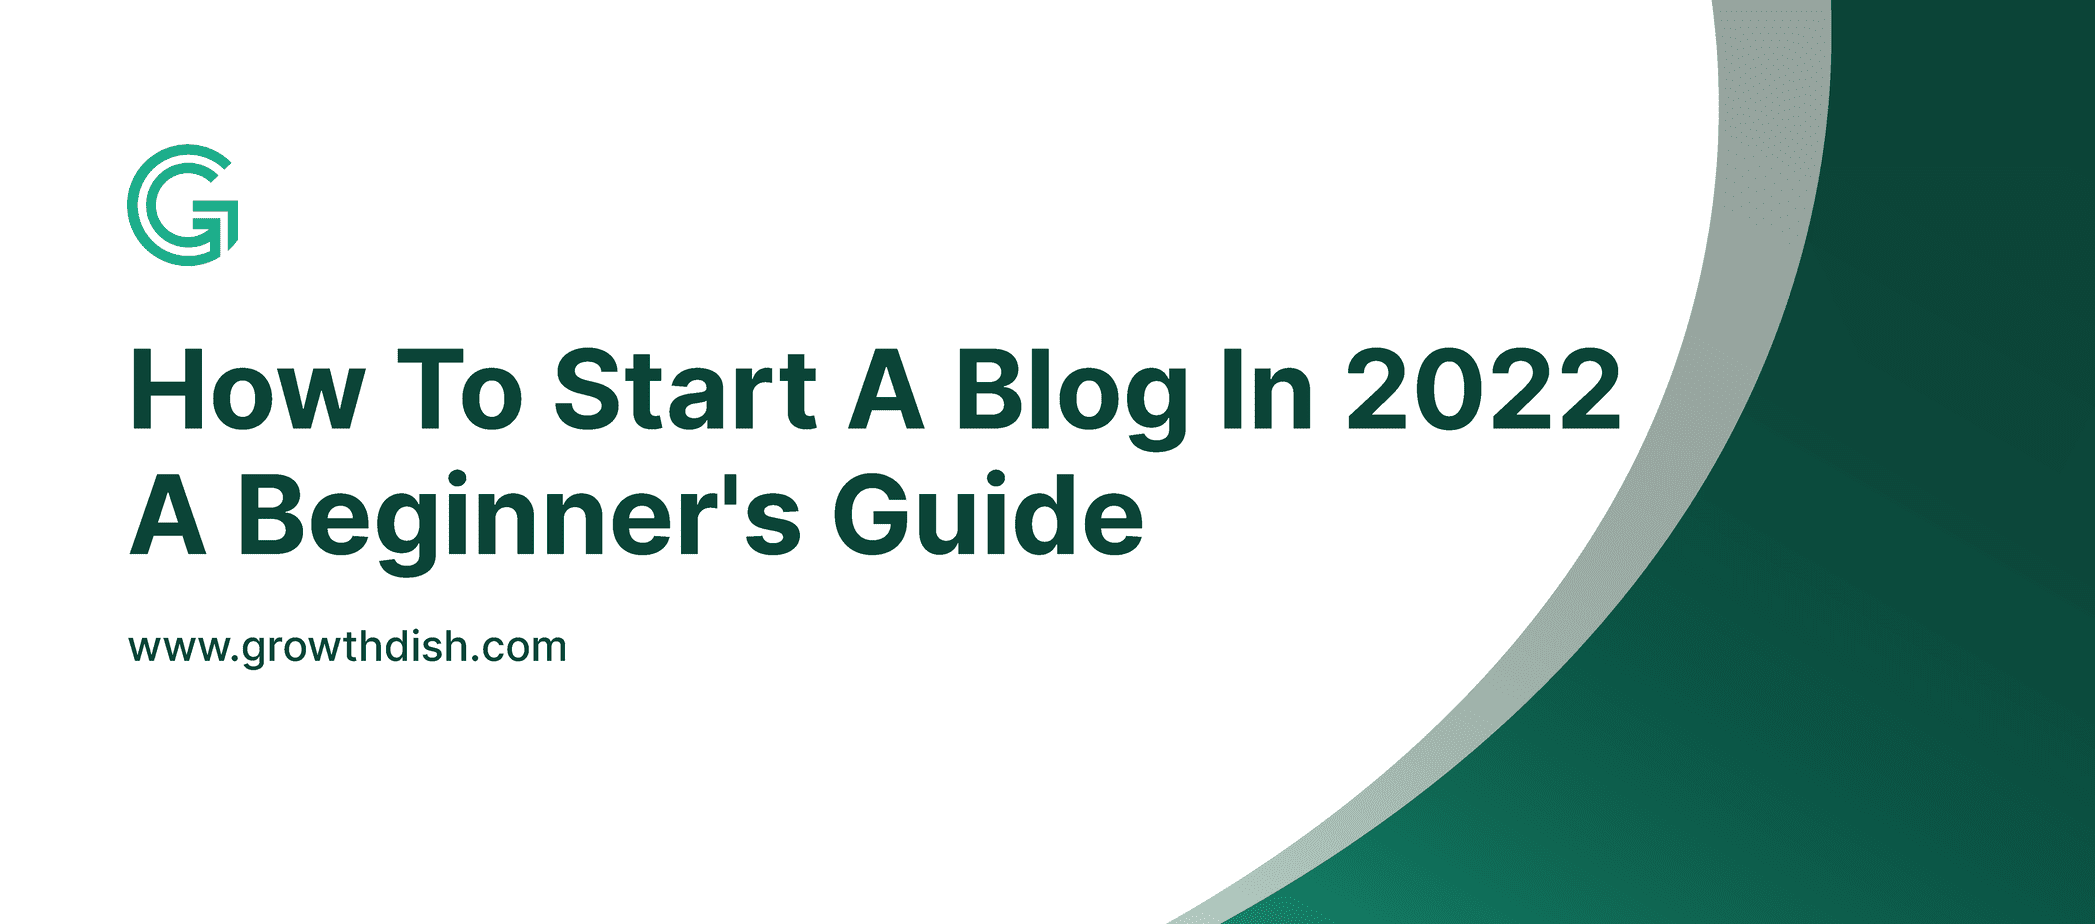 How To Start A Blog in 2022